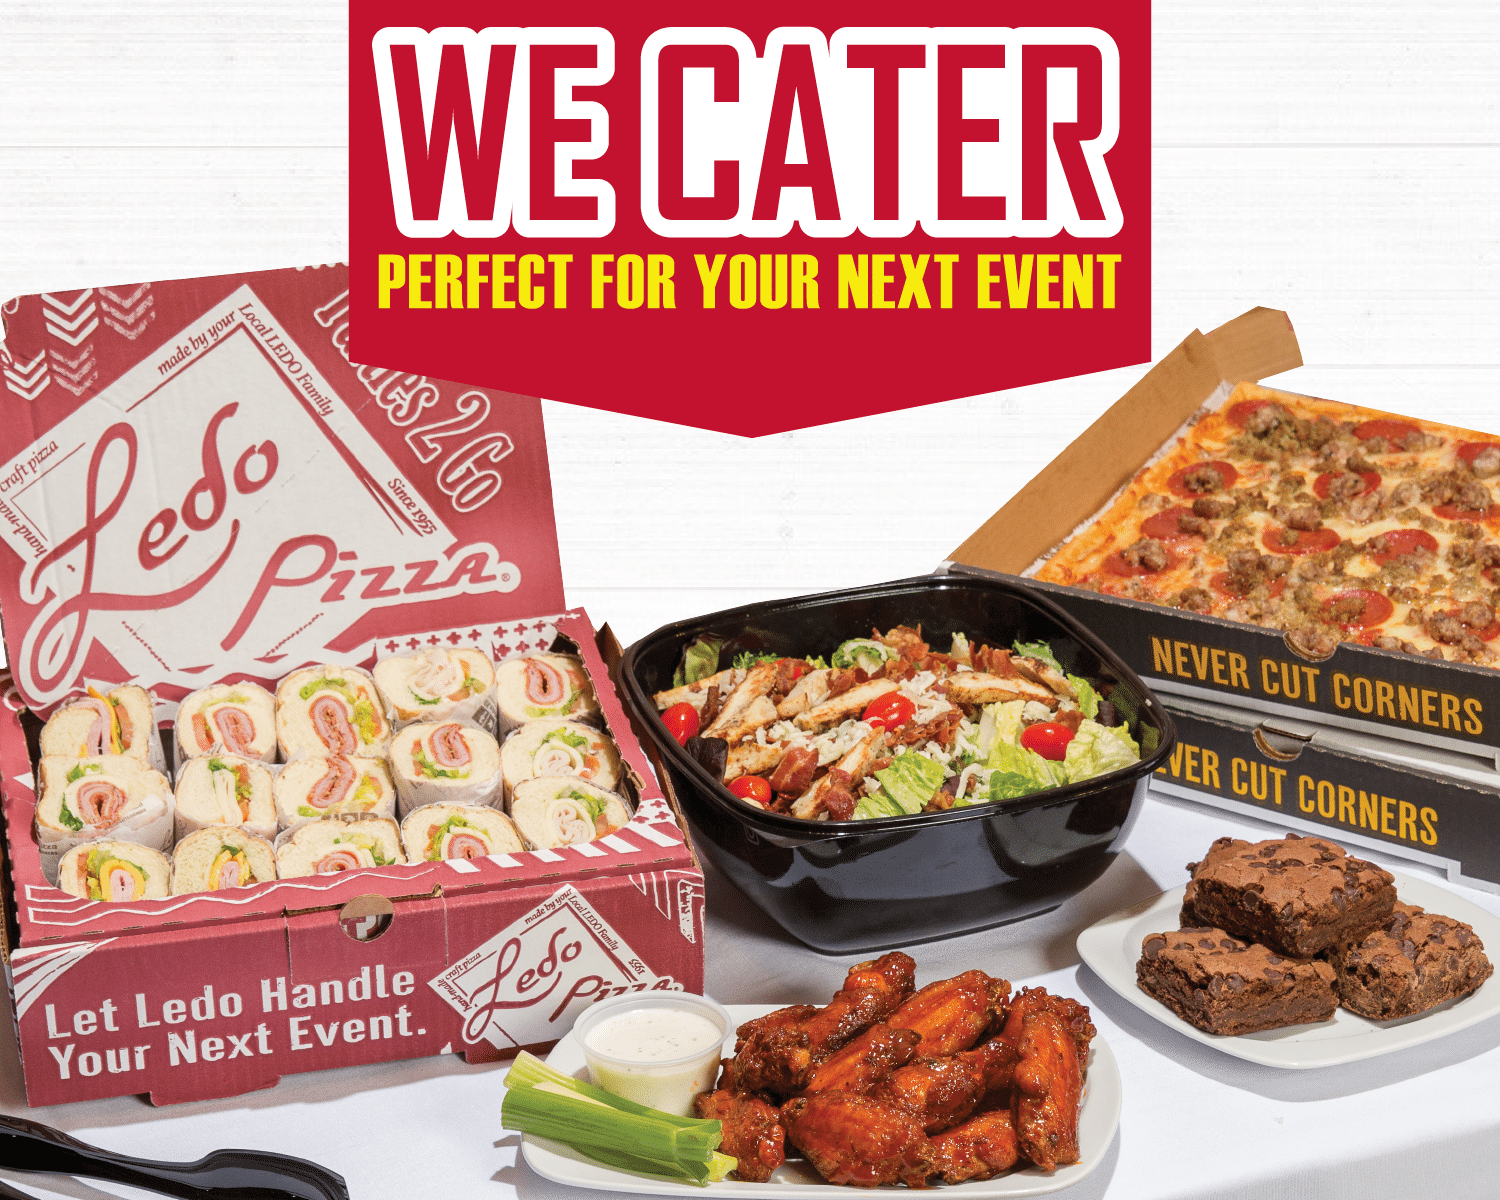 We Cater! Perfect for your next event